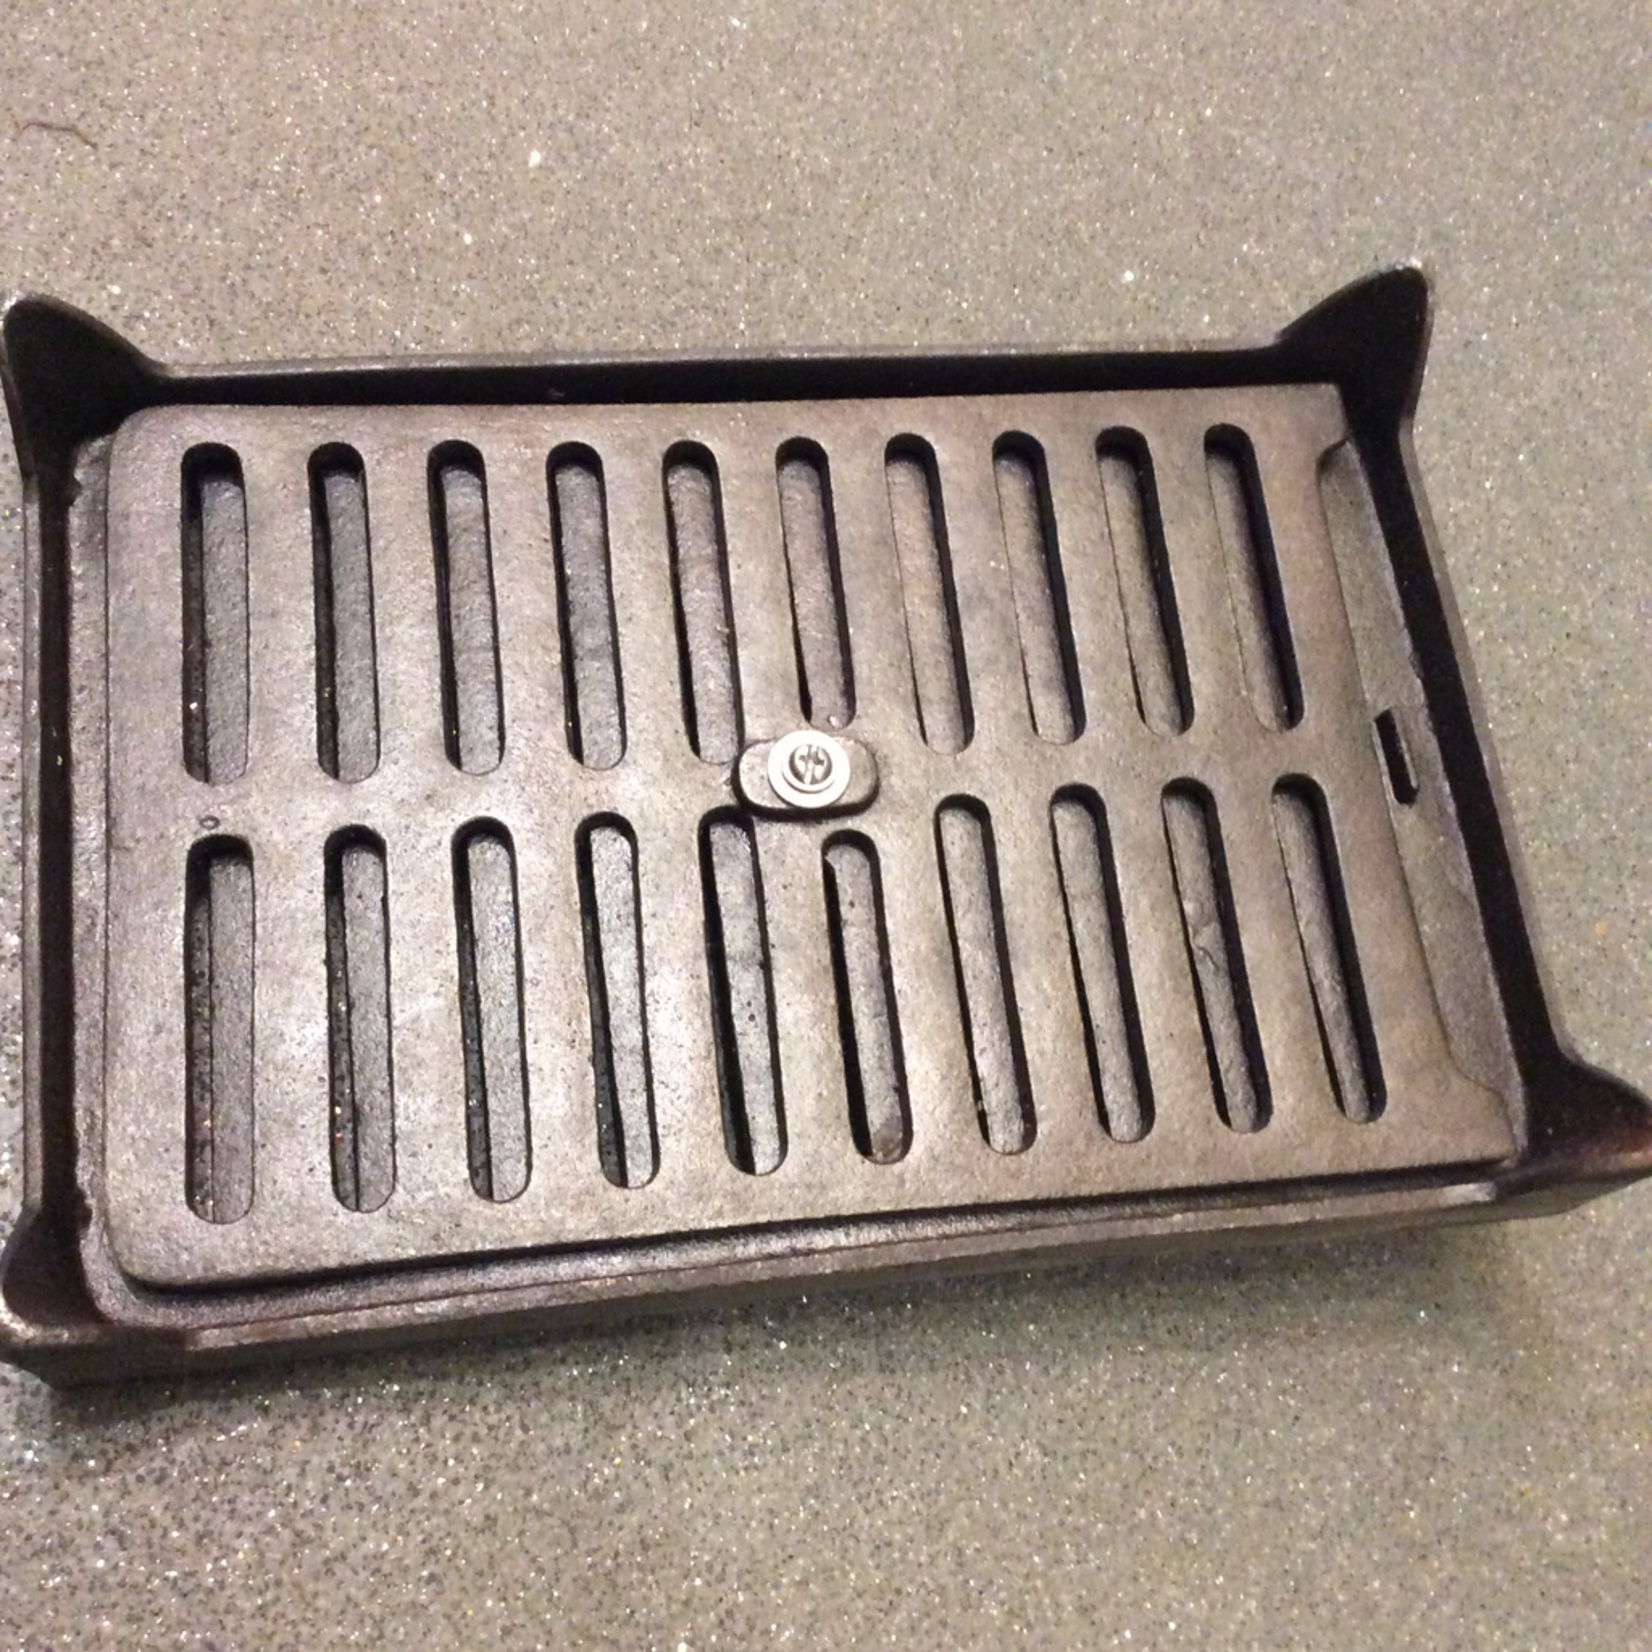 IRON RANGE Air Vent with Adjustable Sliding Layer in Silvery Iron finish